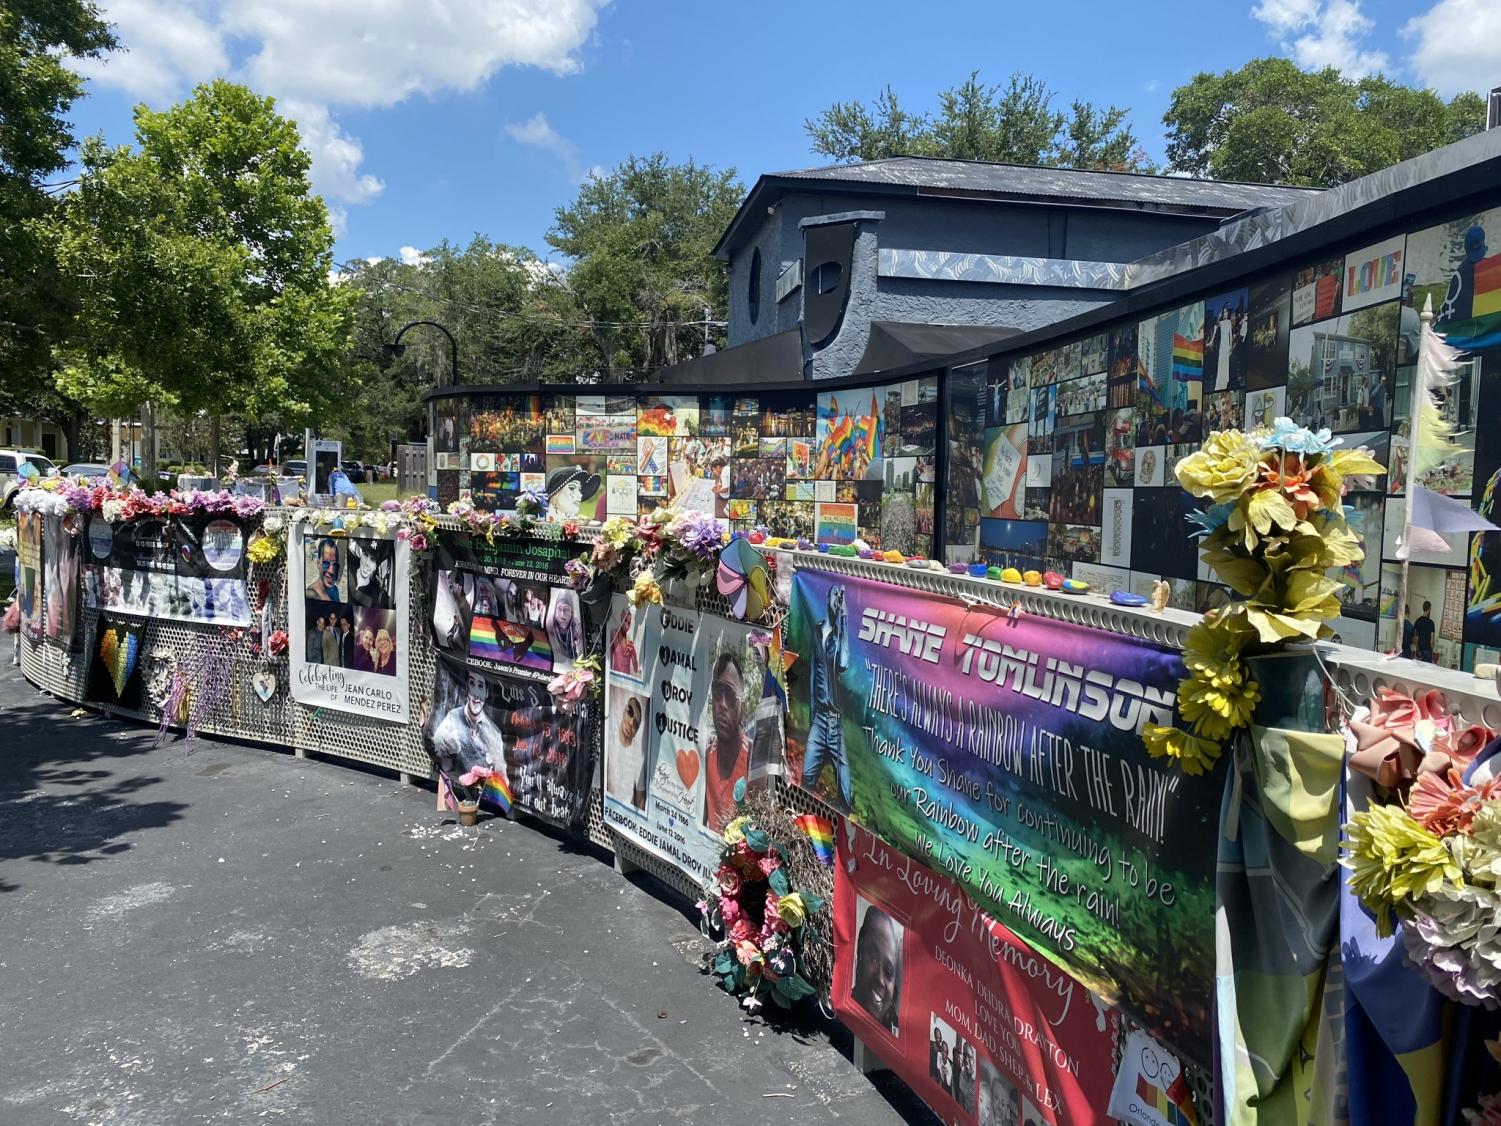 The Interim Pulse Memorial Wall extends along the outside of the Pulse nightclub exterior with window panes for looking inward. Names of the 49 lives lost are visible on the wall inside. 